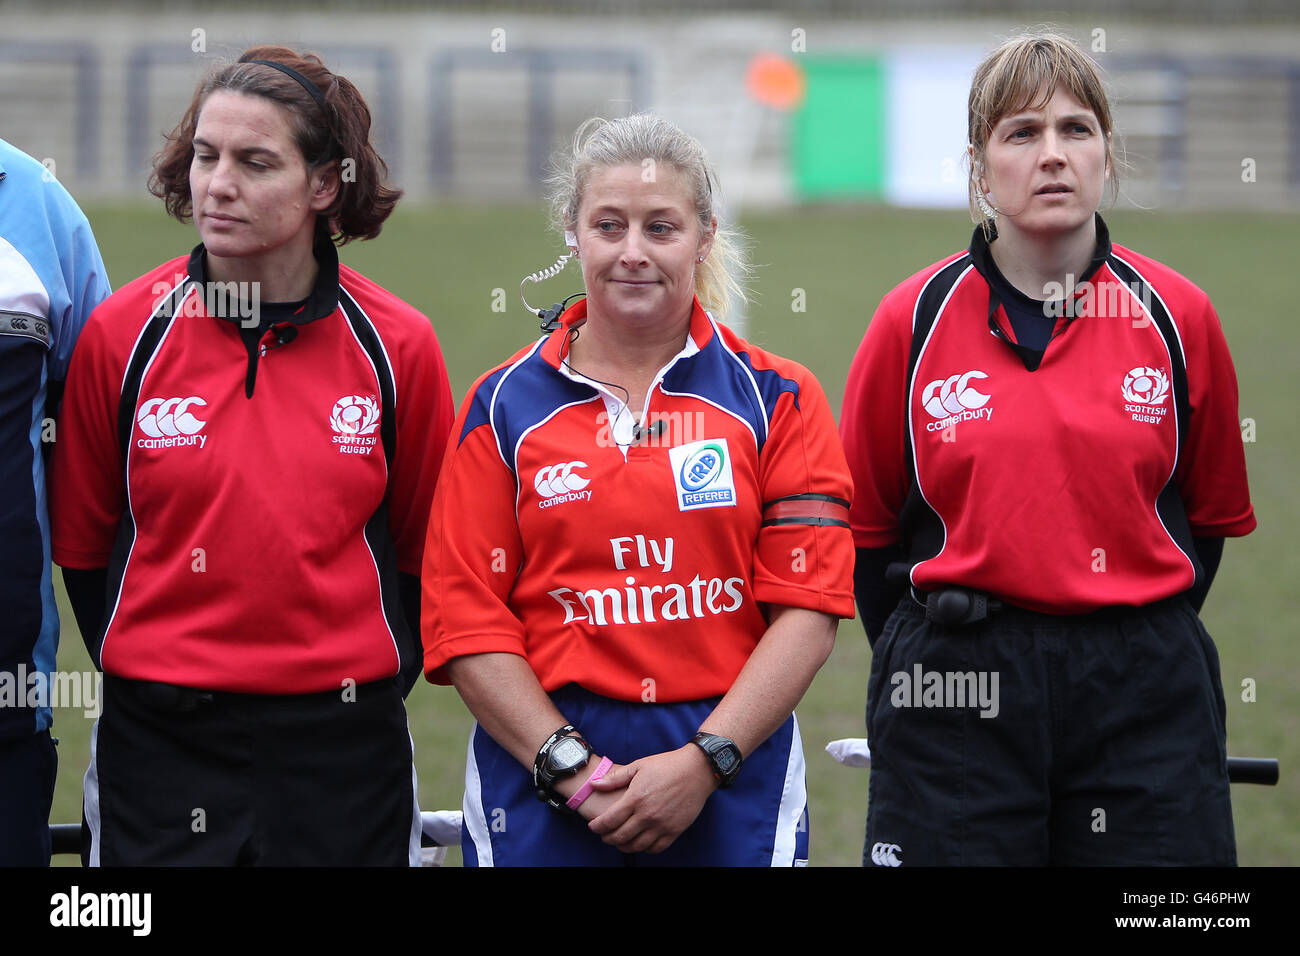 Rugby Union - Women's 6 Nations Championship 2011 - Scotland Women v Italy Women - Meggetland. Referee Nicky Inwood (centre) and touch judges Mhairi Hay and Alex Pratt Stock Photo